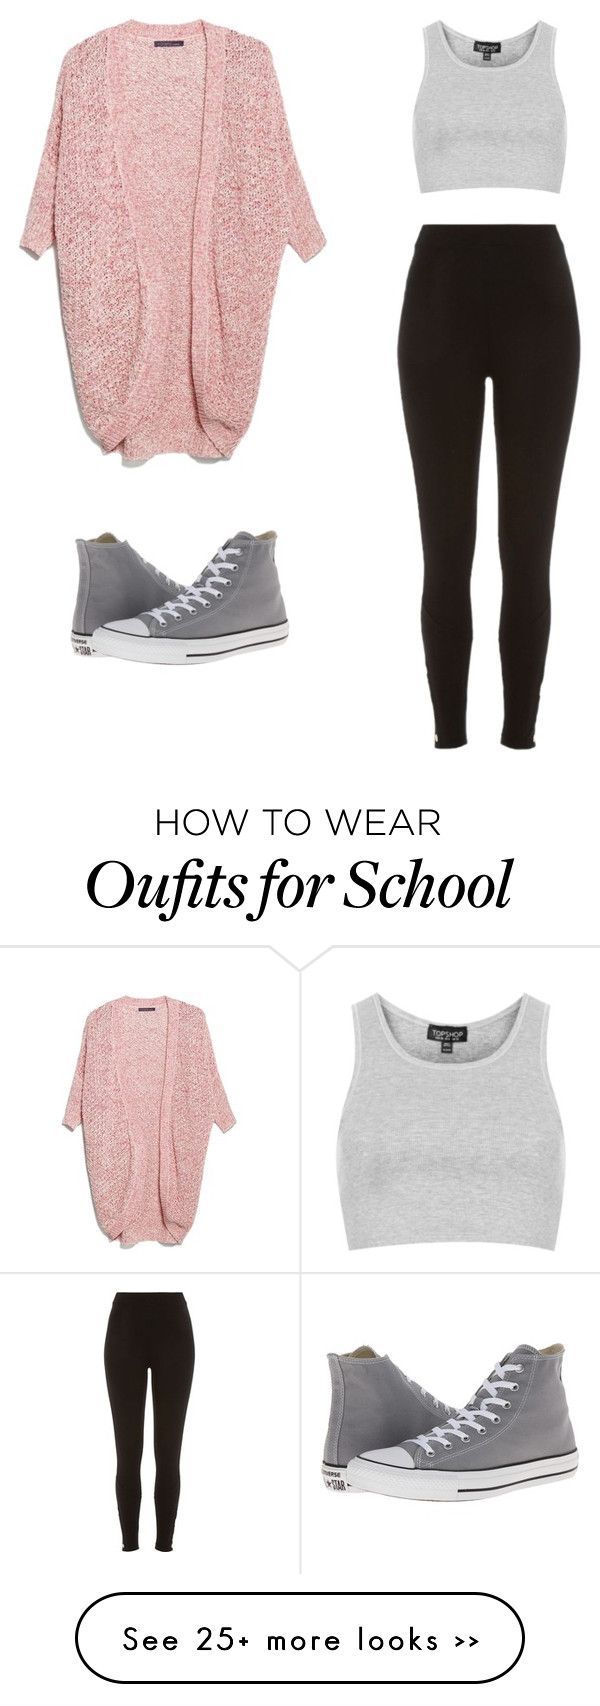 “school” by annikalabonte on Polyvore featuring MANGO, Topshop, River Island and Converse